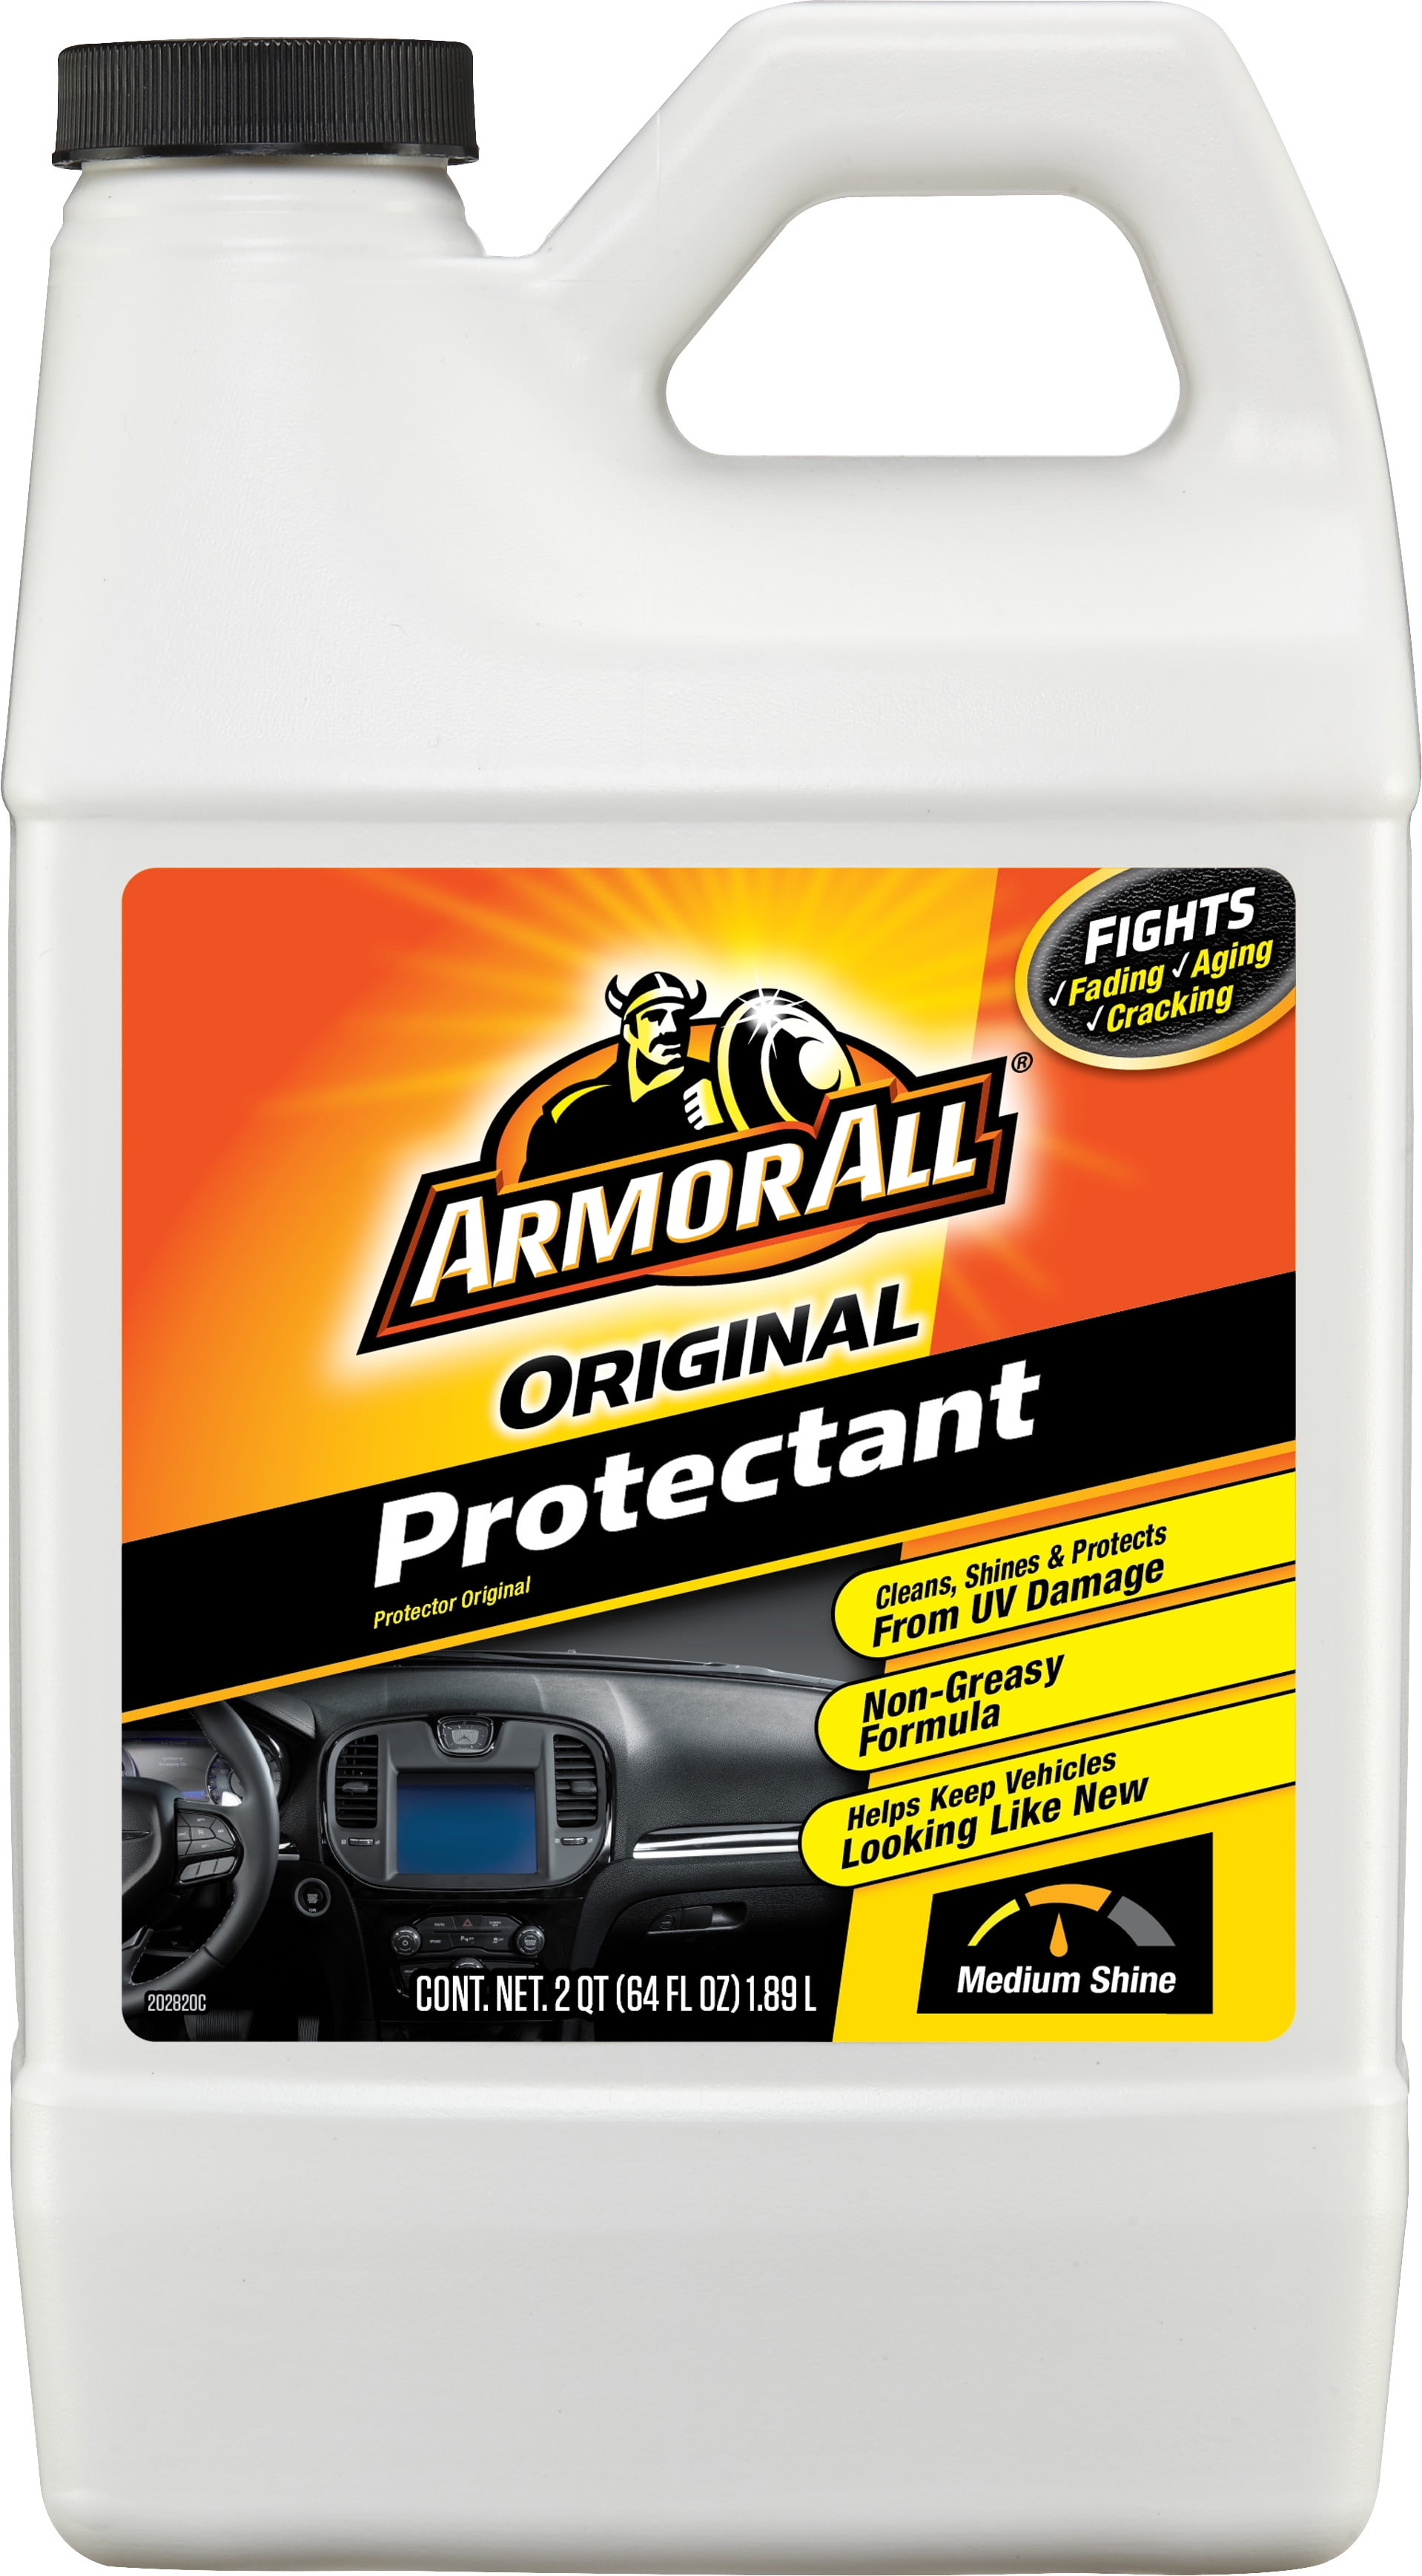 Armor All Original Protectant Wipes by Armor All, Car Interior Cleaner  Wipes with UV Protection to Fight Cracking & Fading, 30 Count